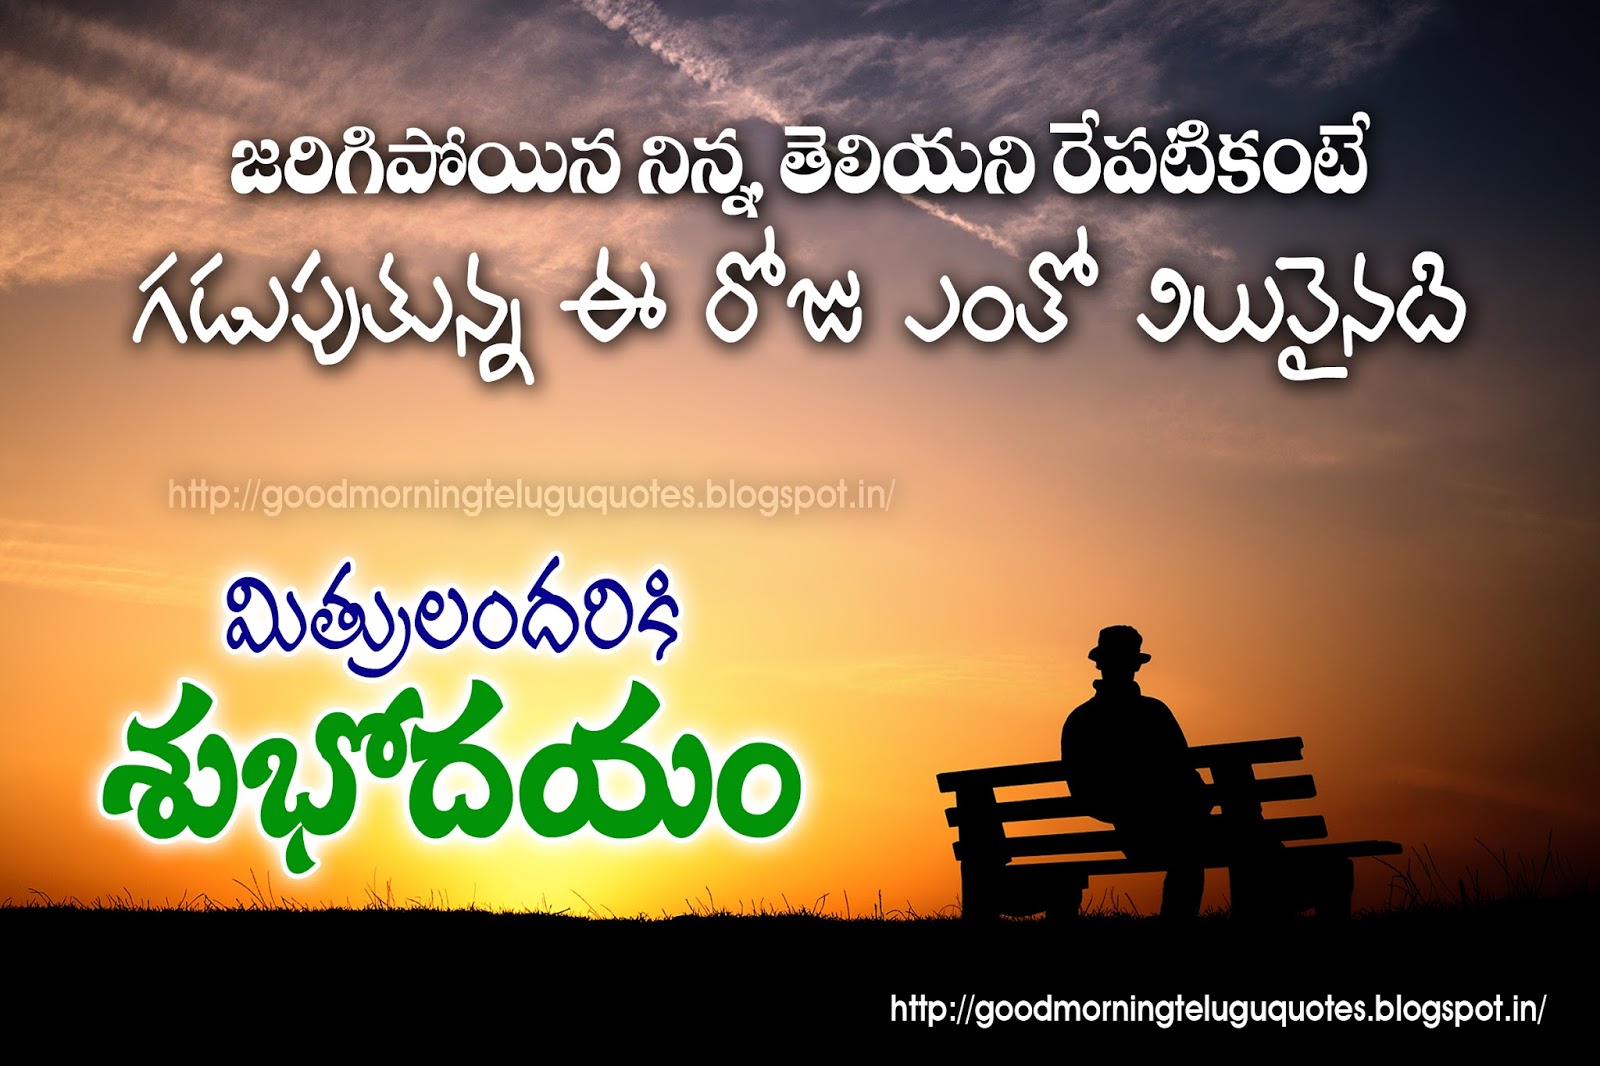 Best Telugu Good Morning Quotations greetings wishes